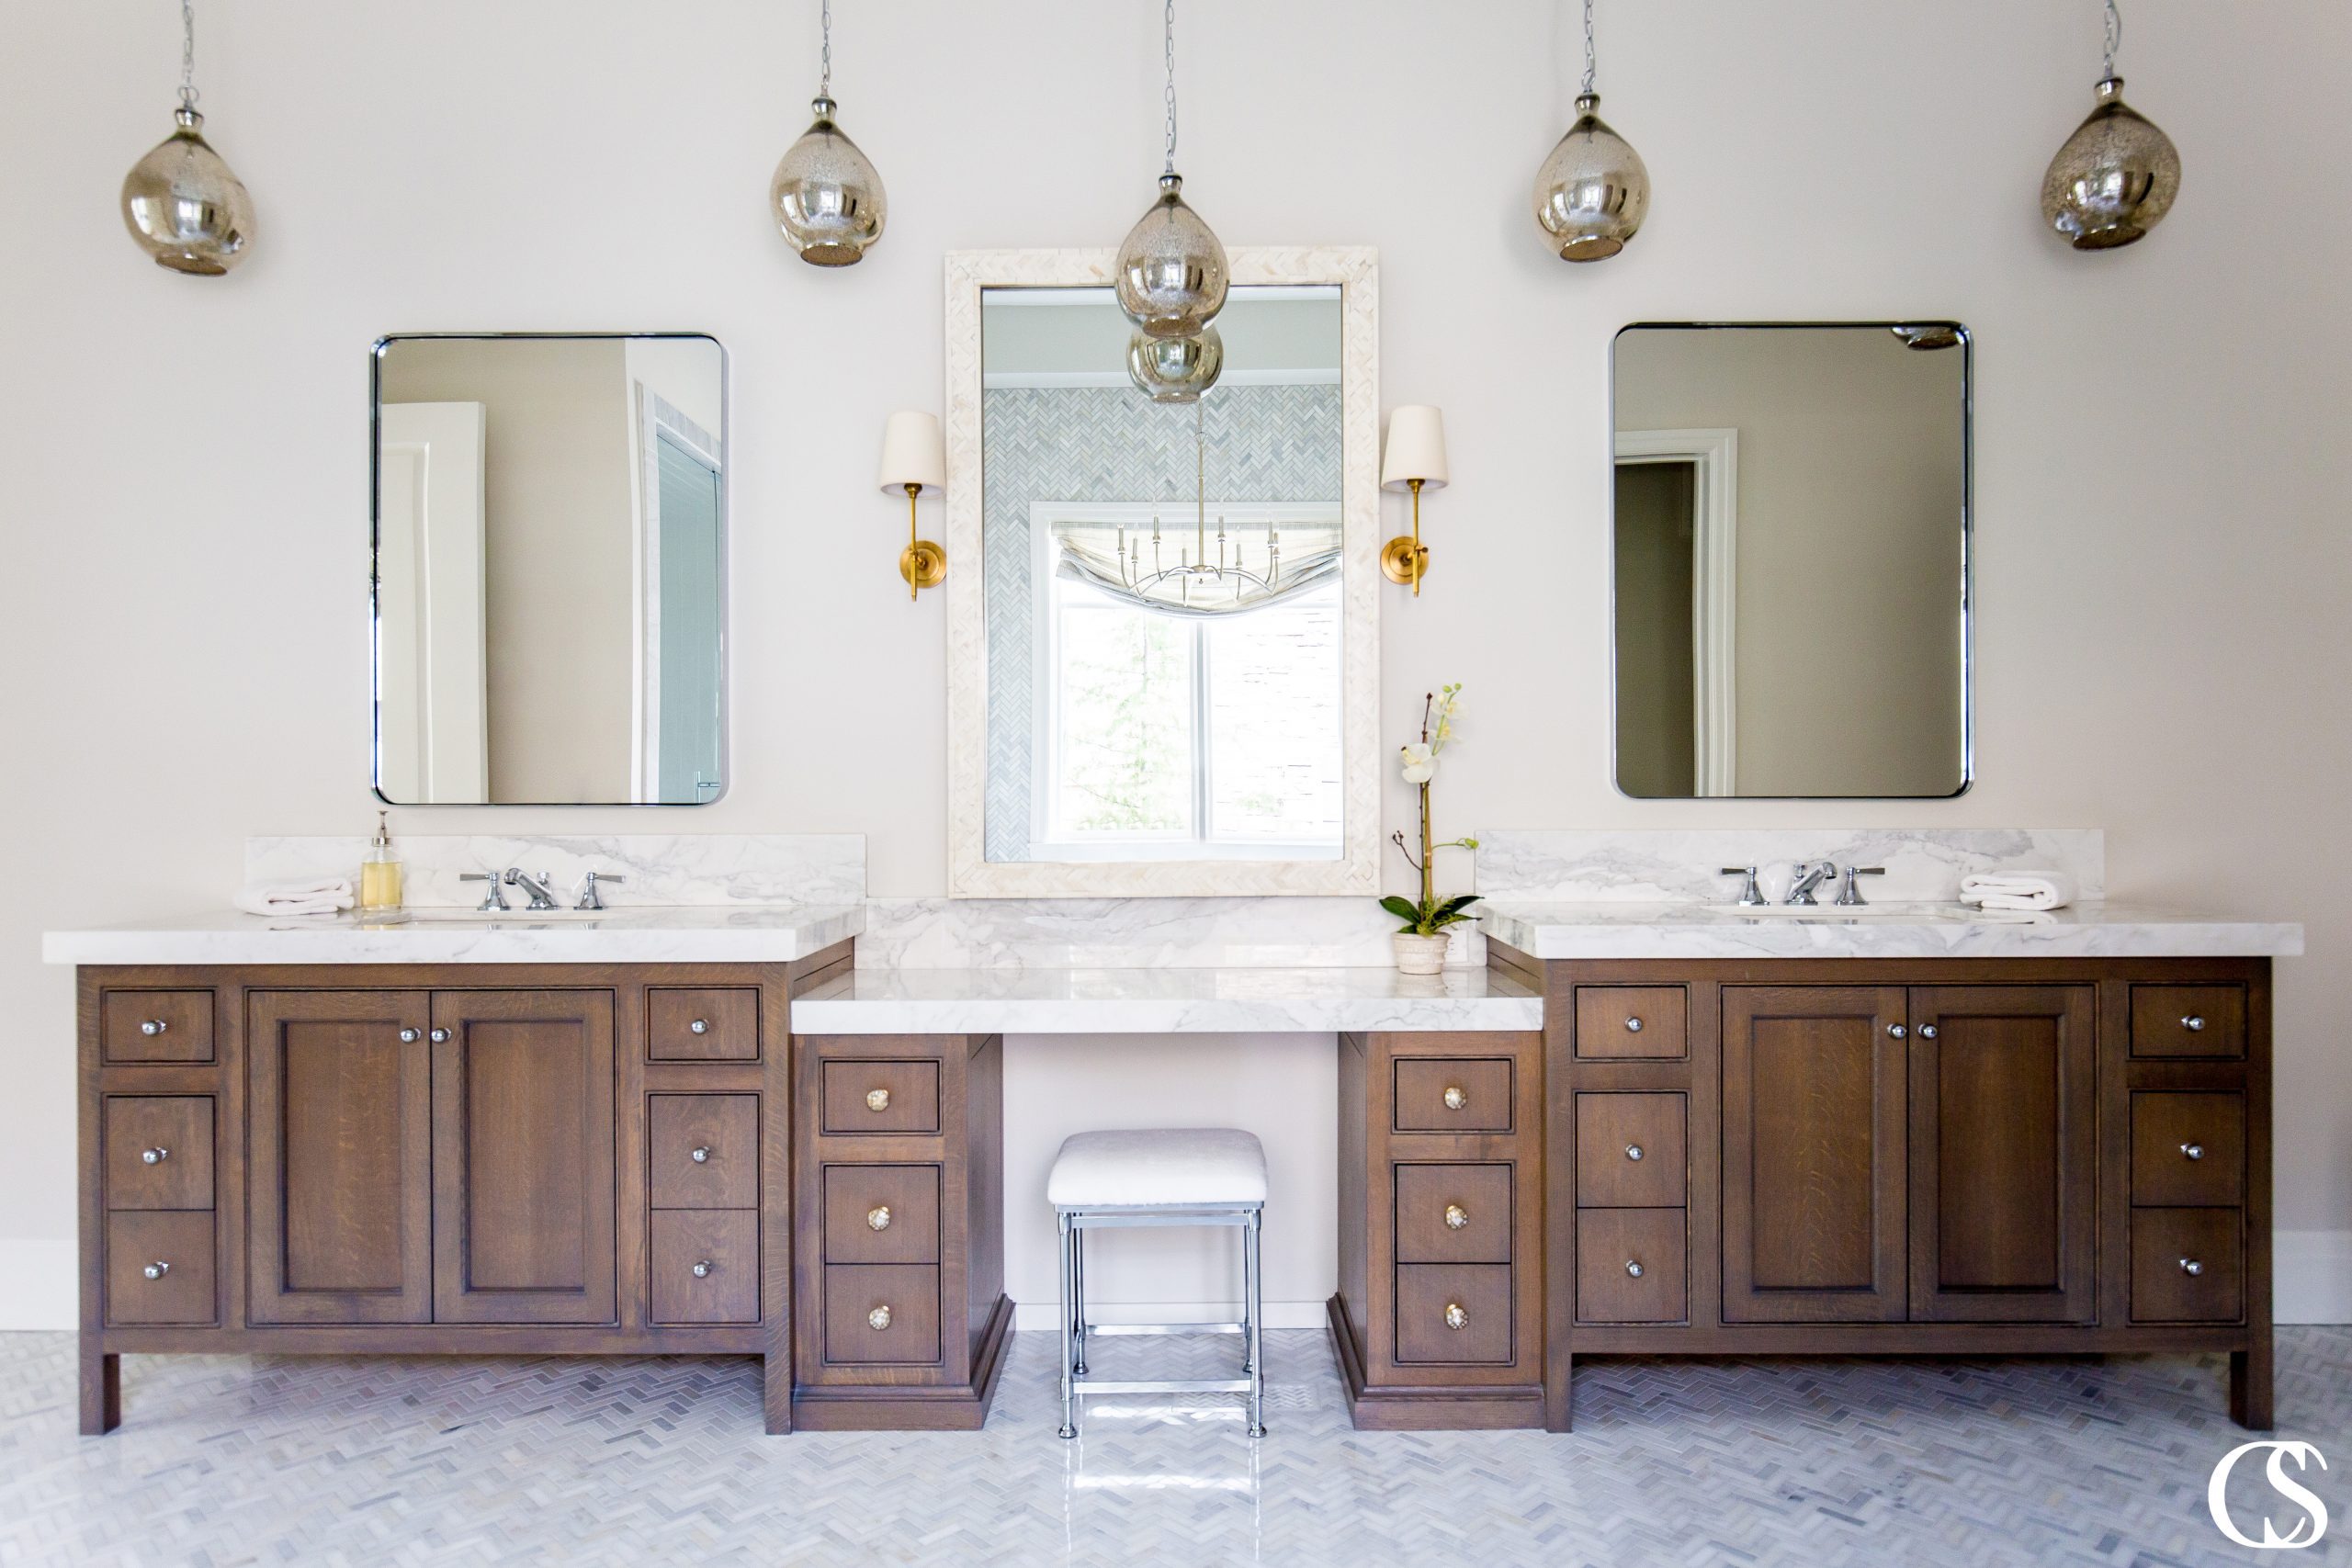 The custom two sink bathroom vanity is as modern a solution as it gets, but the unique bathroom design together evokes a dreamy vintage vibe.